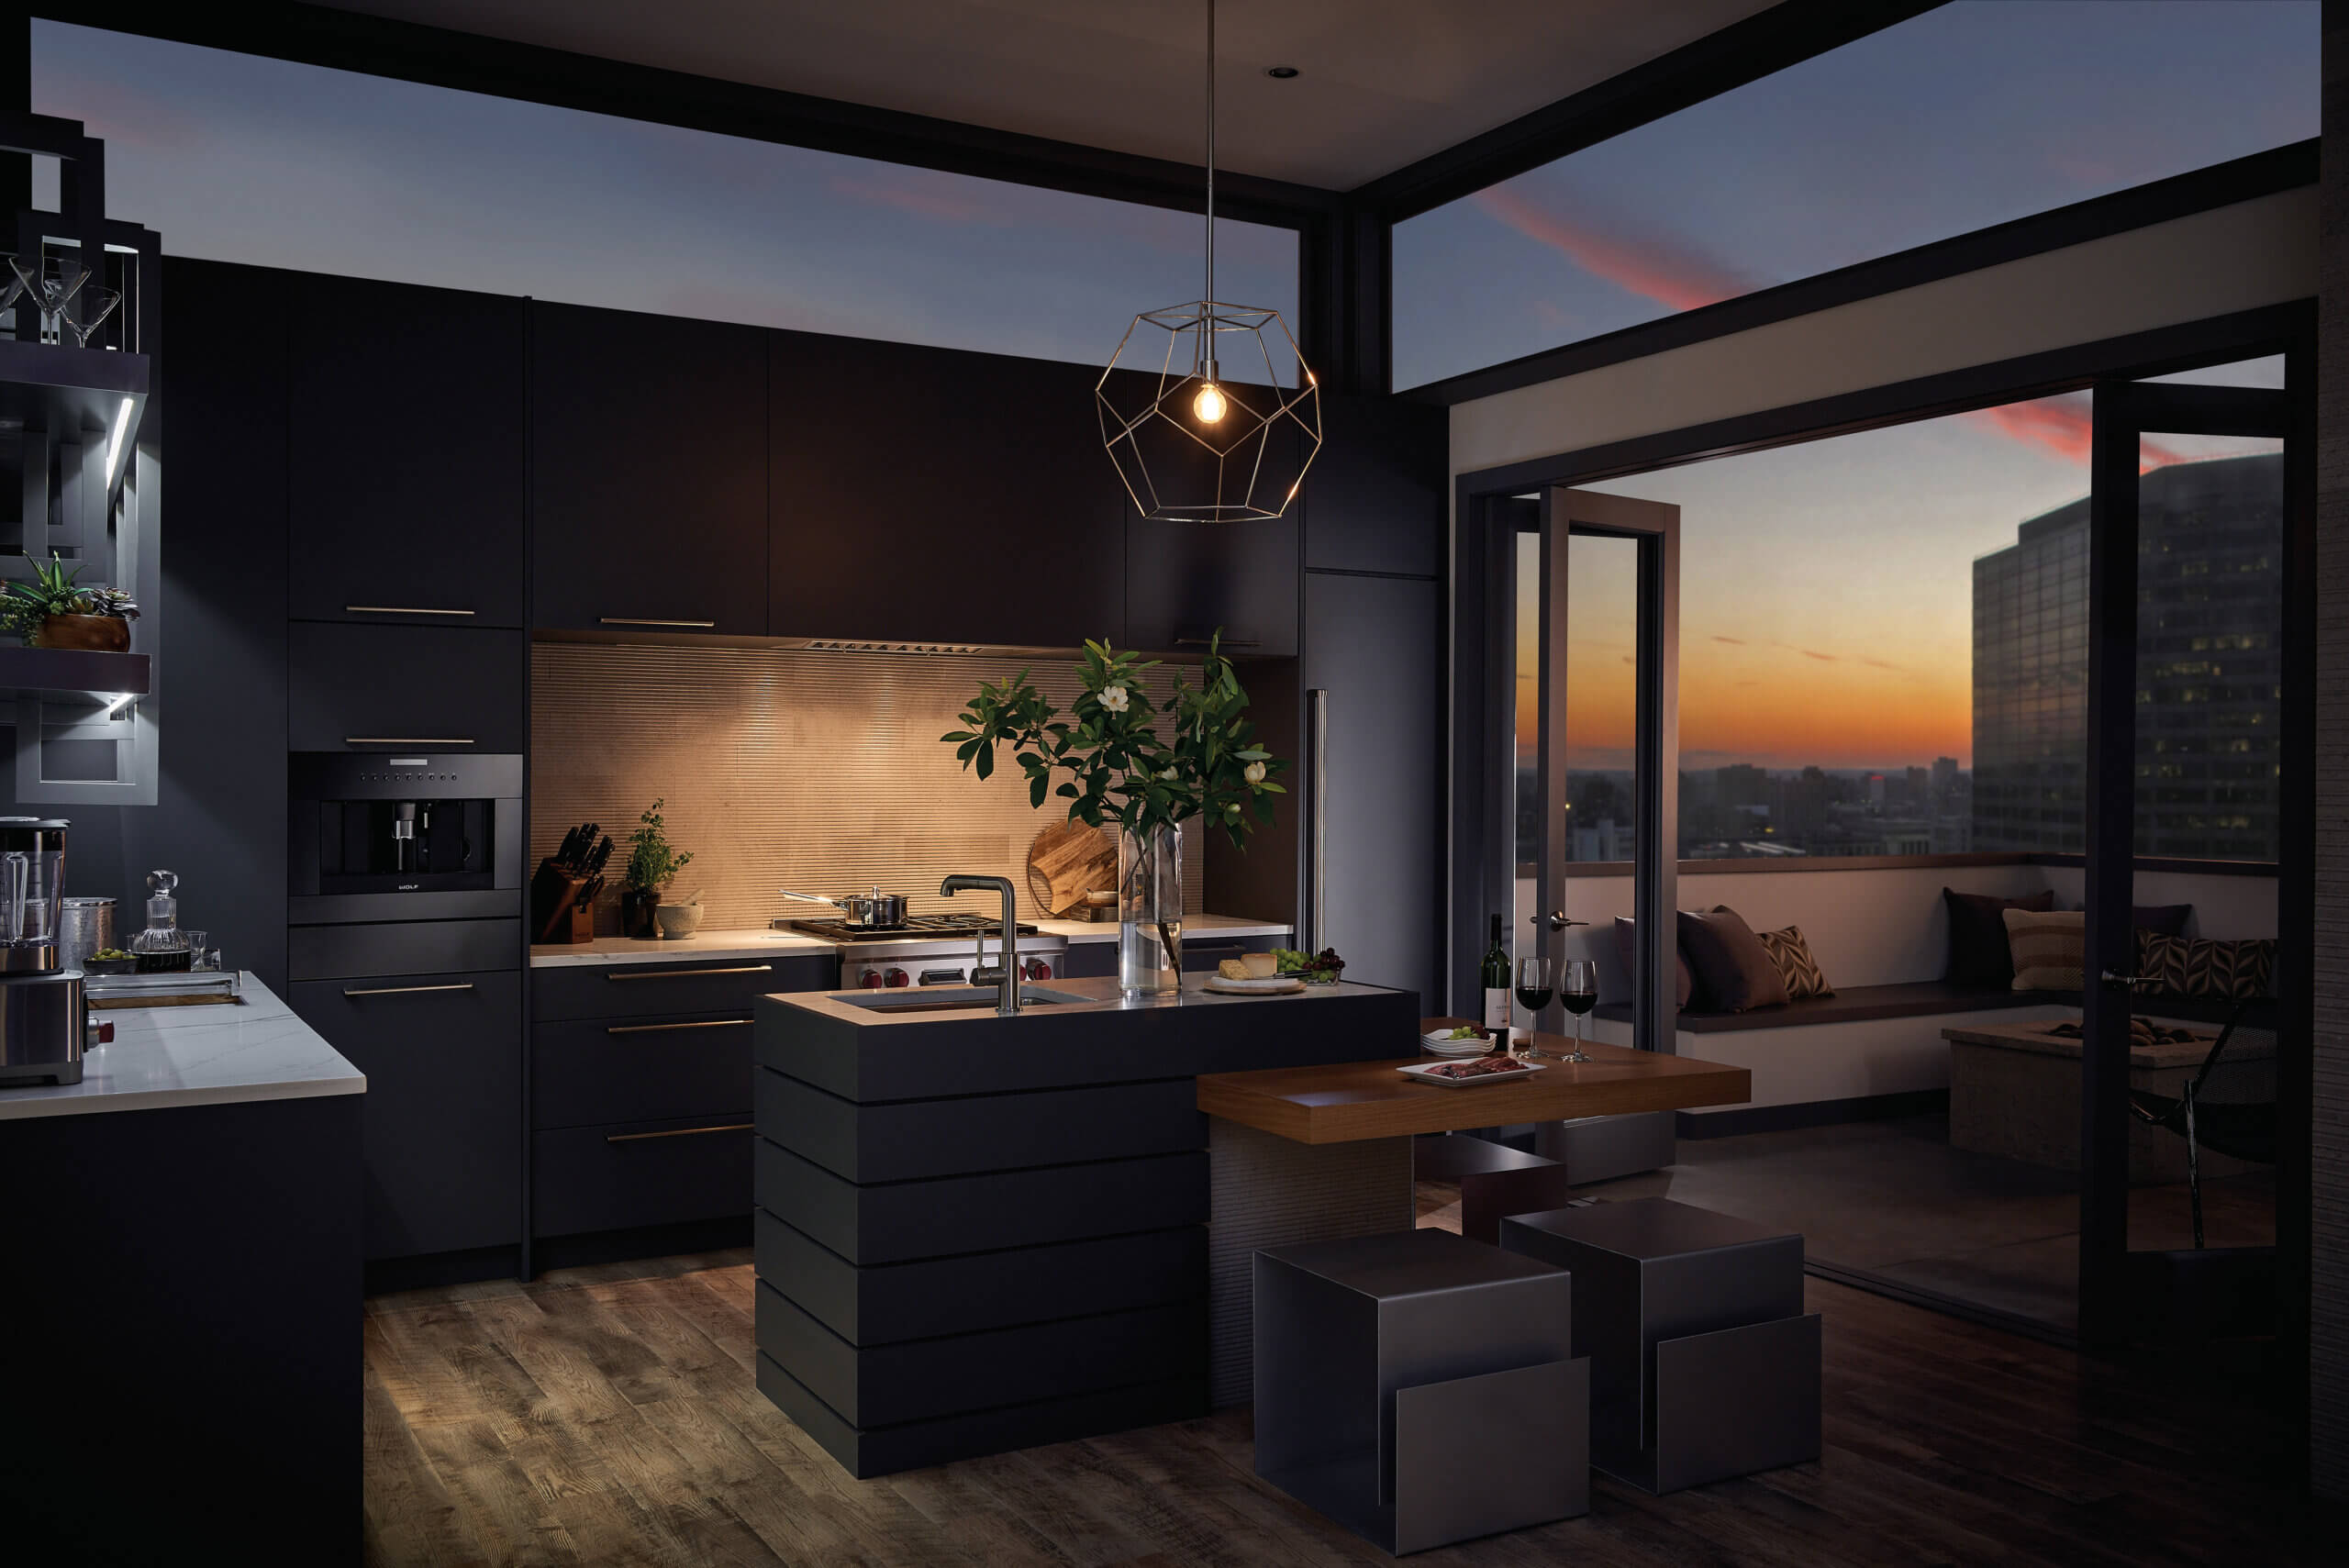 Modern kitchen design with black cabinetry and sunset on balcony in background